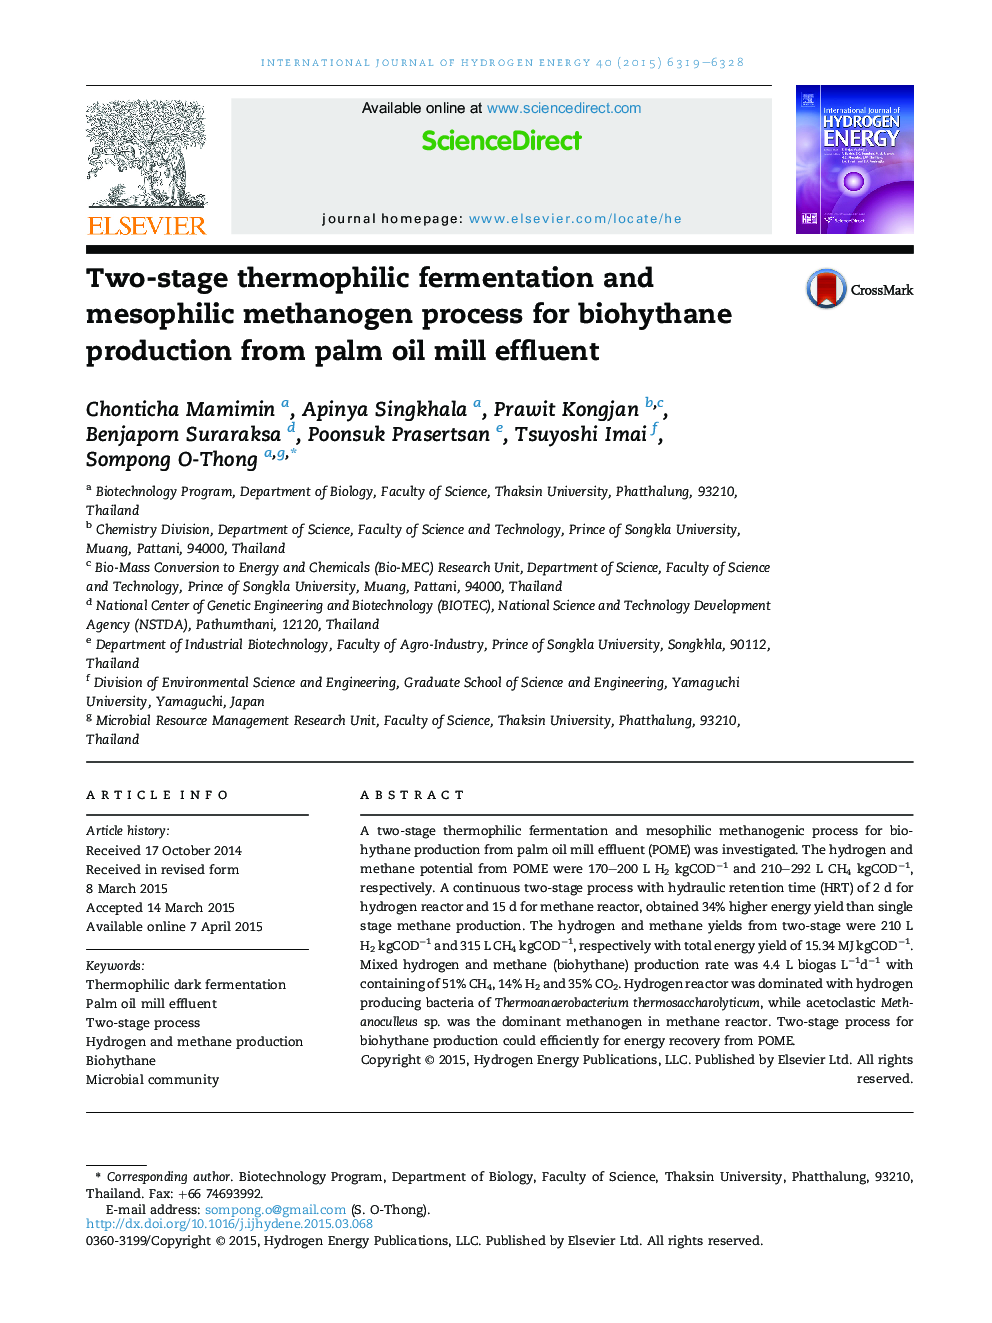 Two-stage thermophilic fermentation and mesophilic methanogen process for biohythane production from palm oil mill effluent